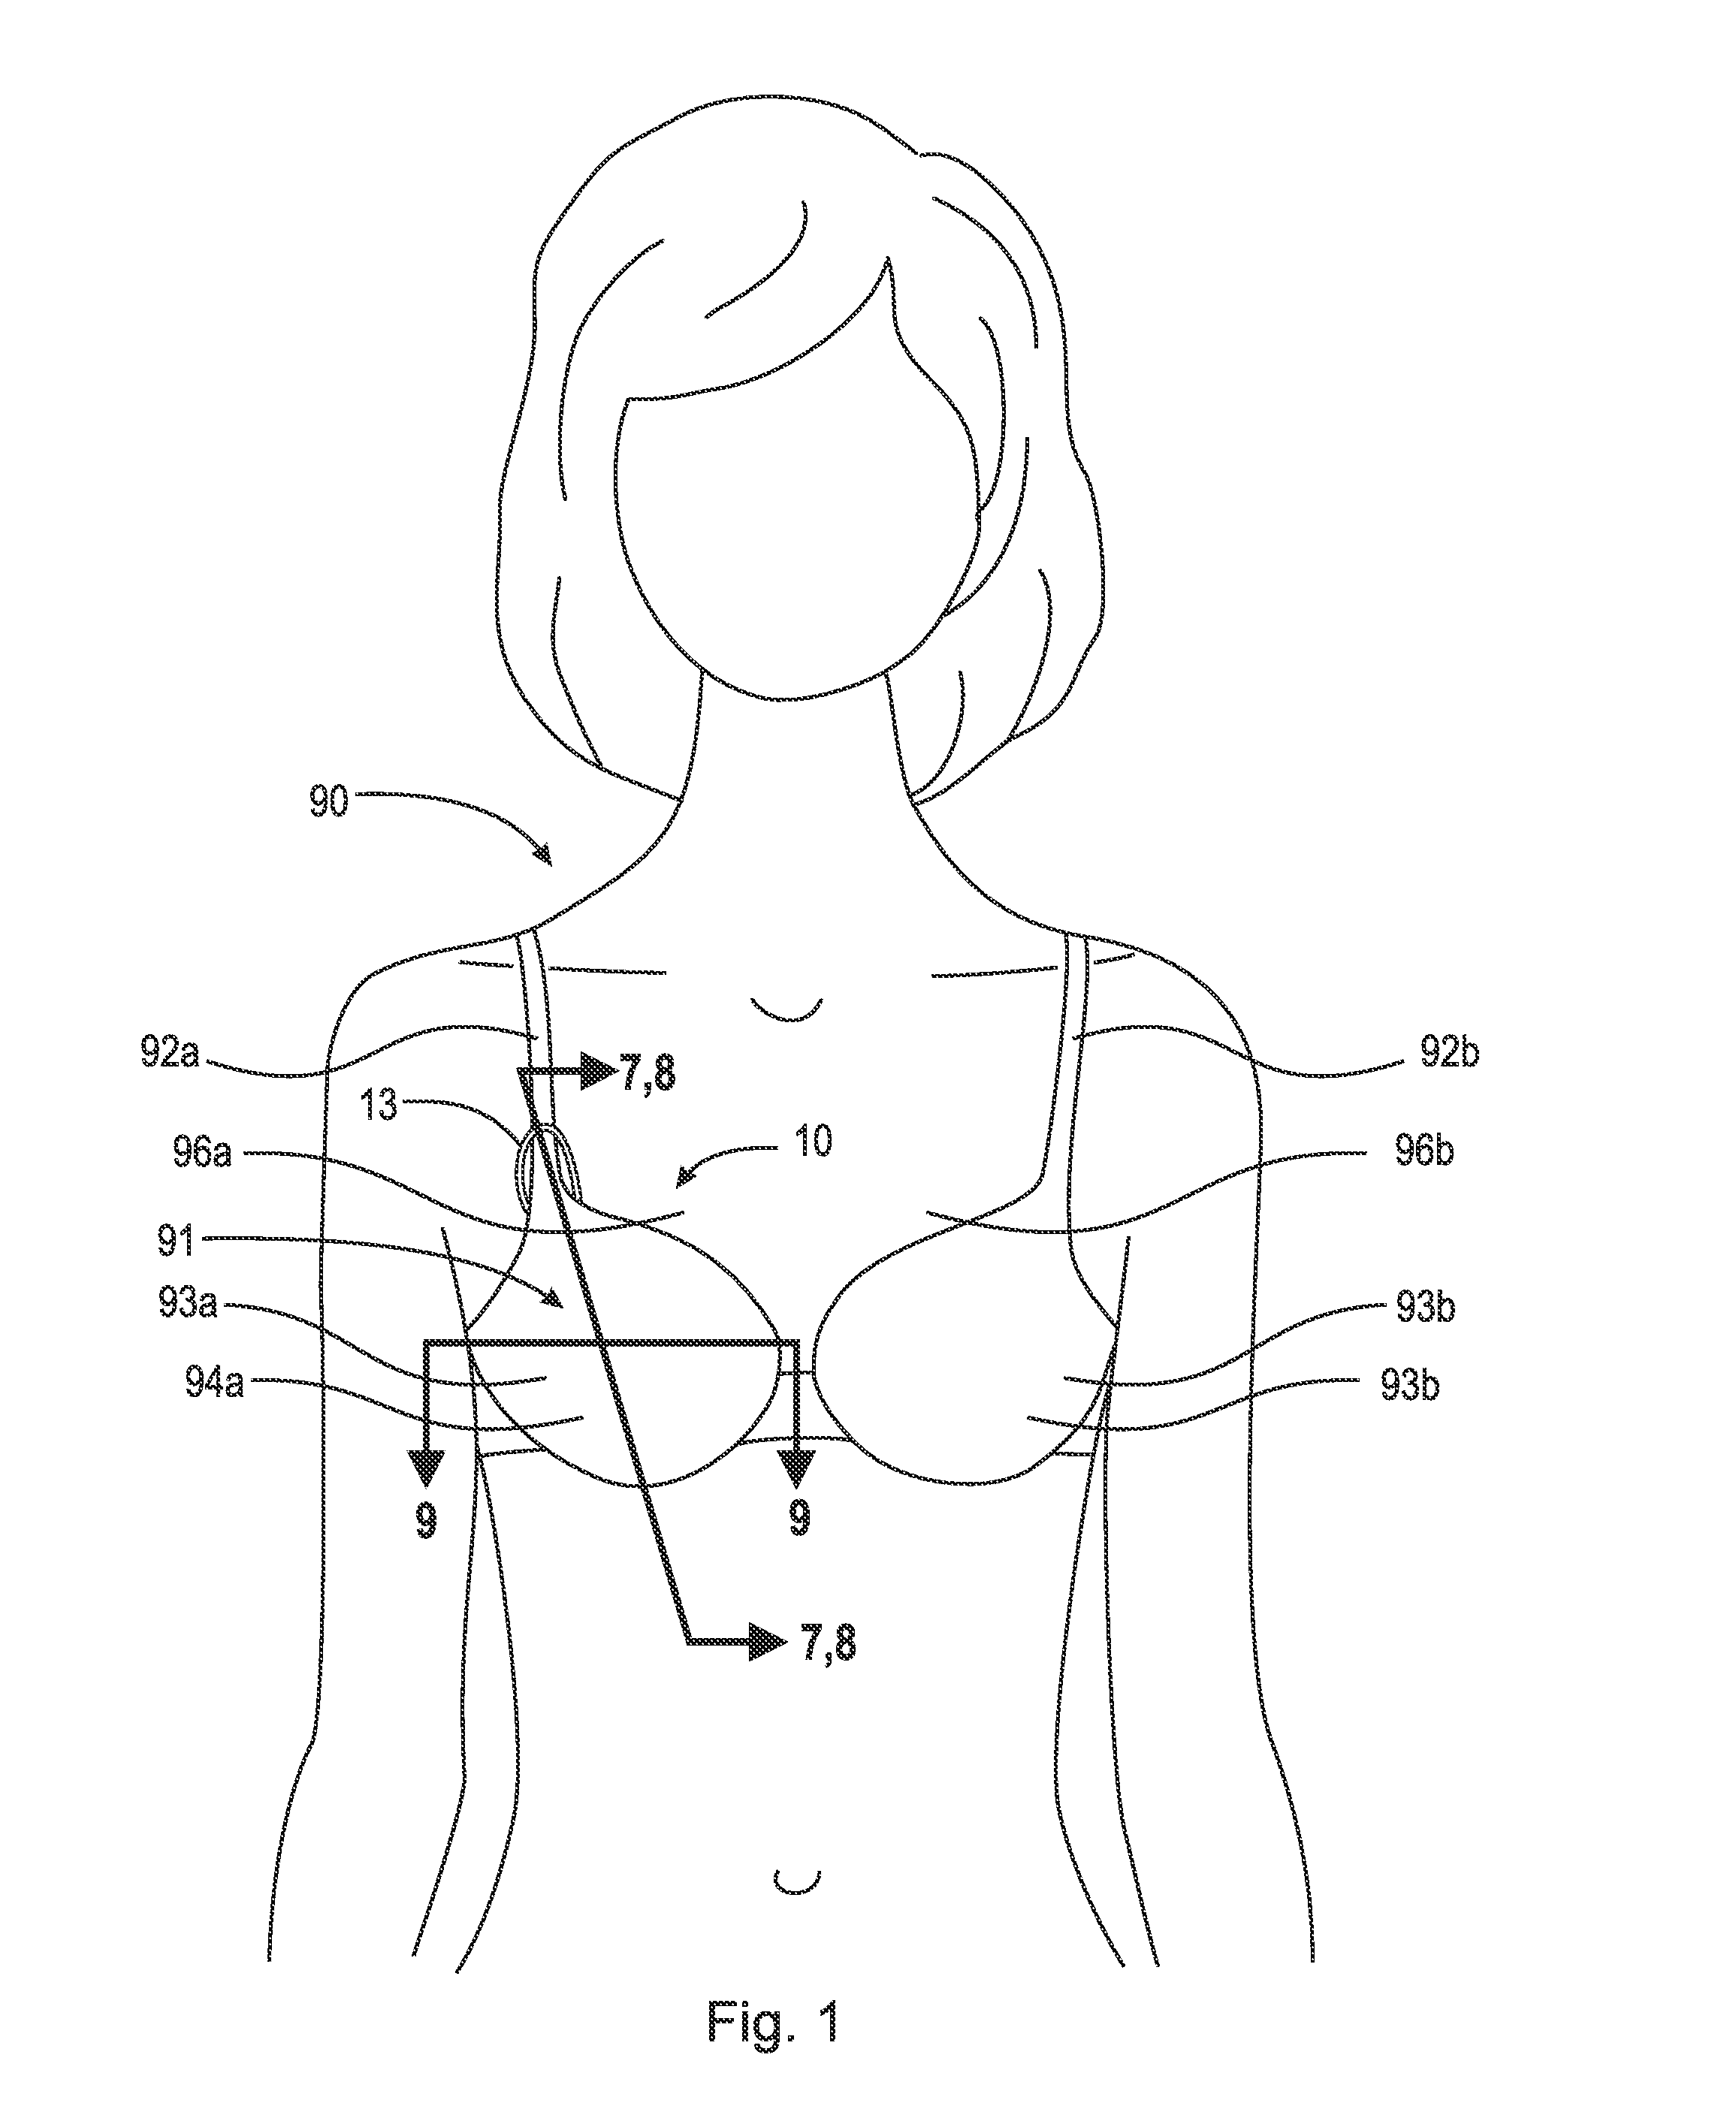 Thermal device for treating breastfeeding conditions